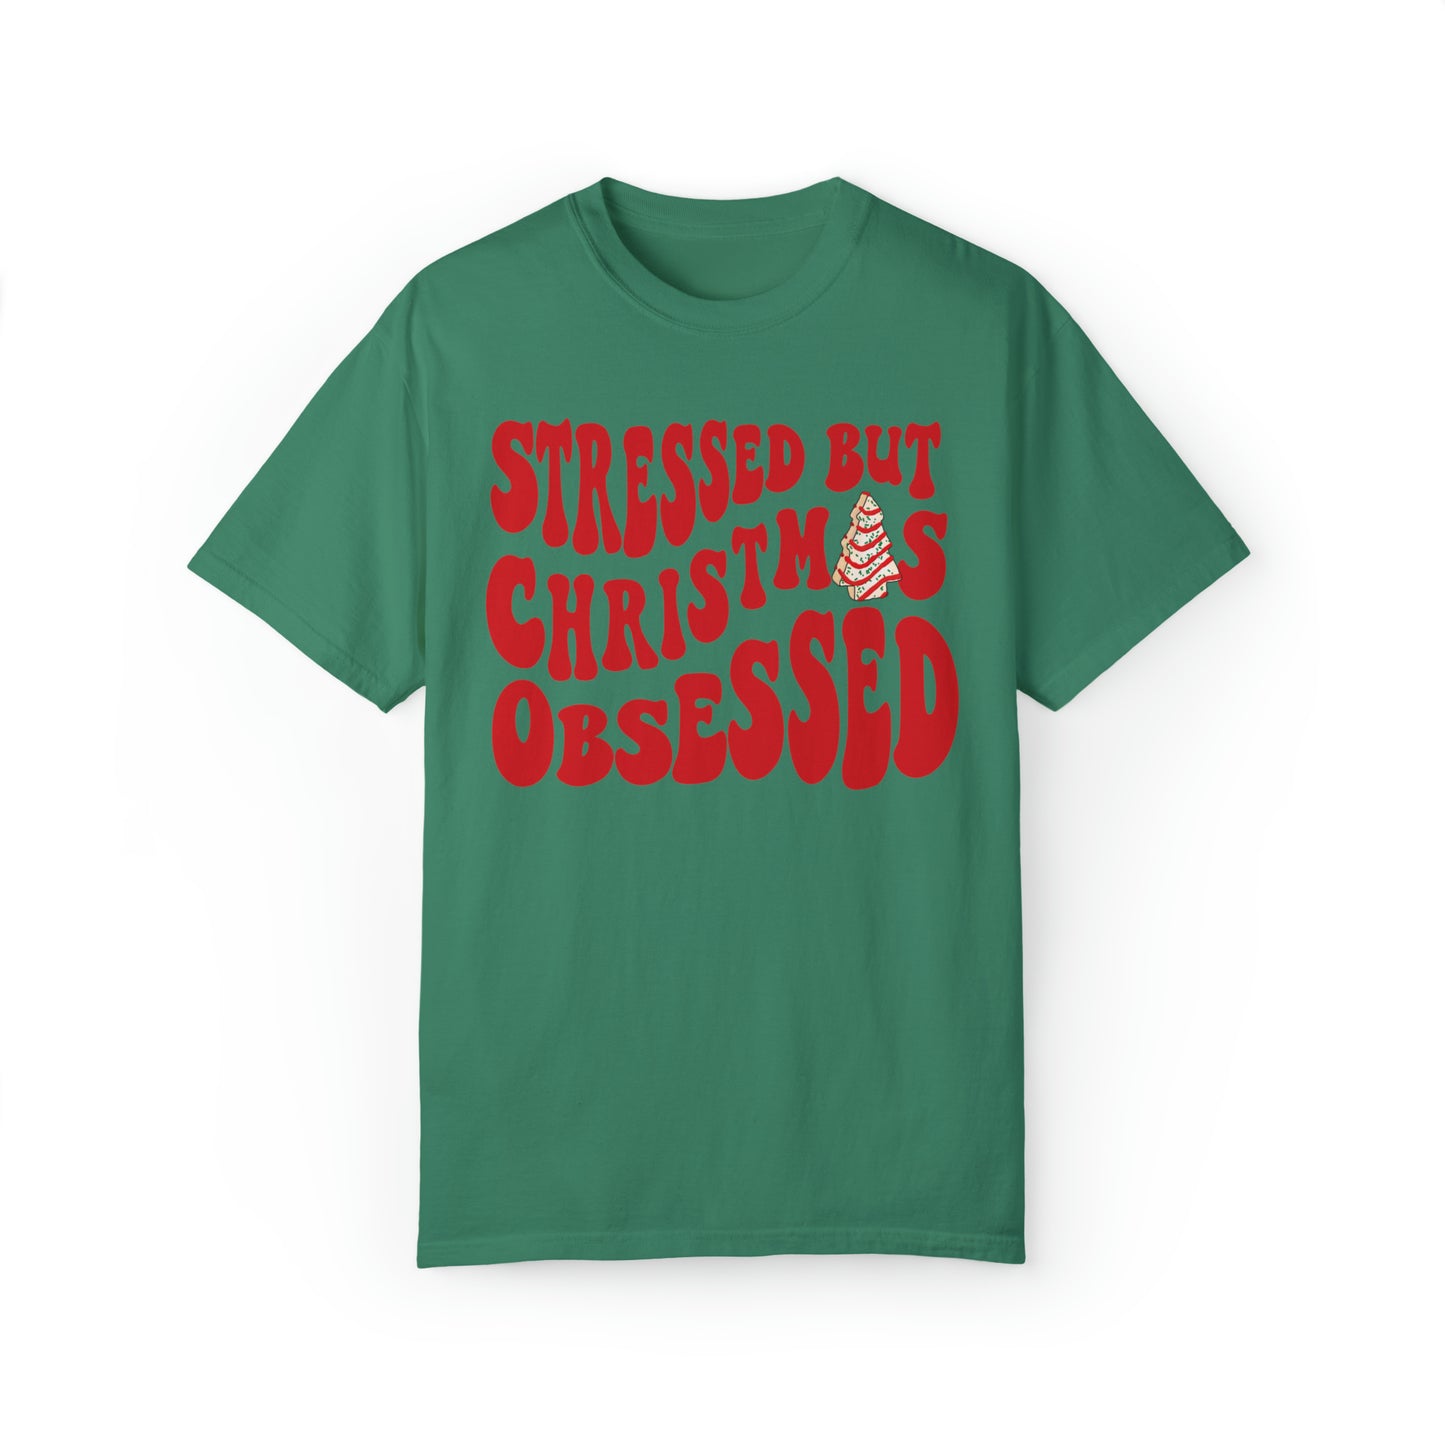 Stressed But Christmas Obsessed Shirt